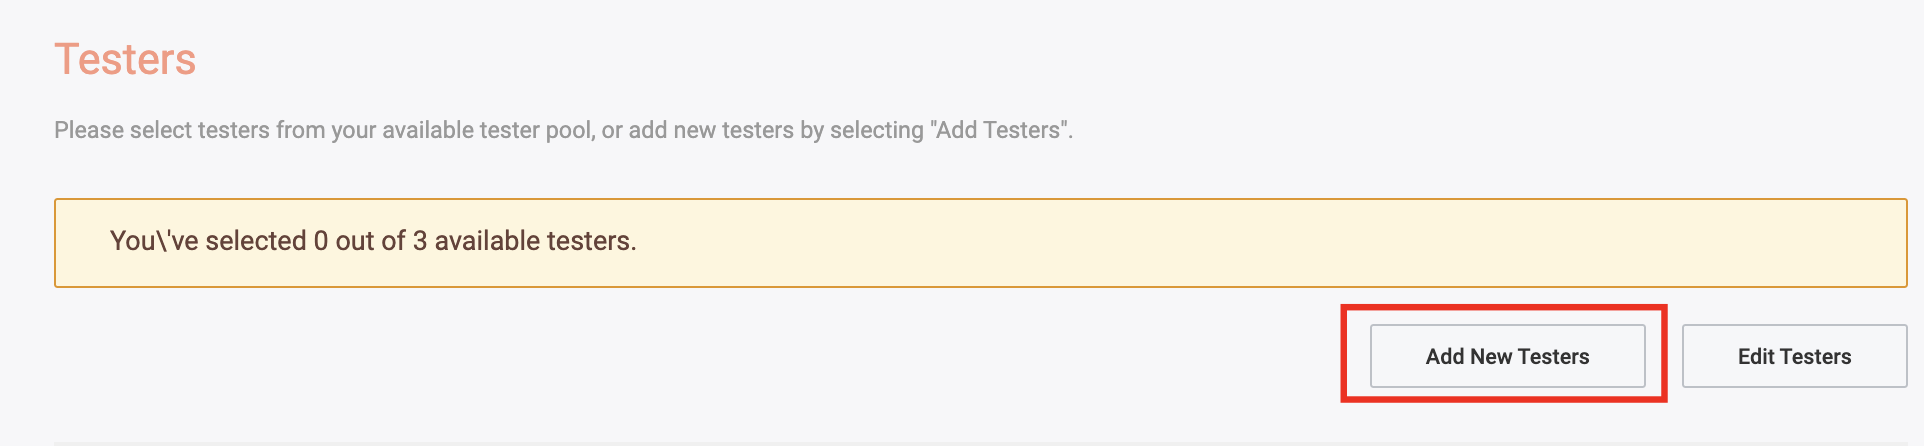 Add New Testers